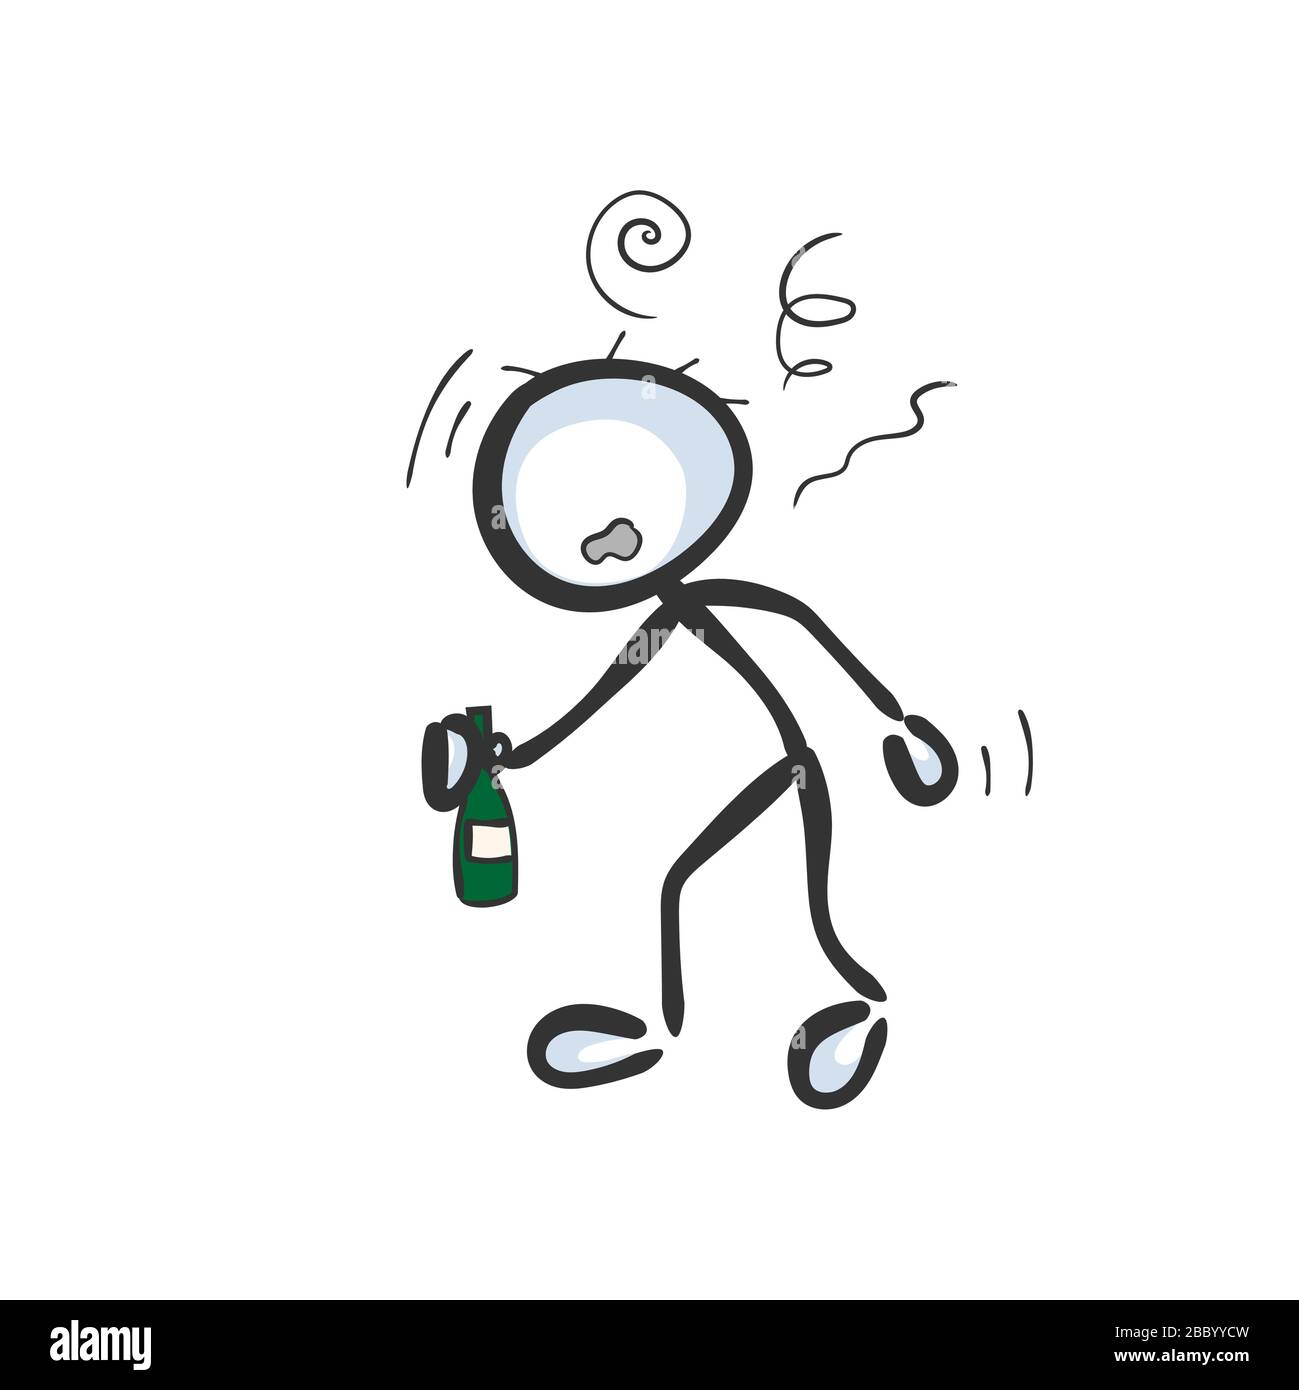 Drunk man. Alcoholic holding bottle of alcohol. Social issue. Hand drawn. Stickman cartoon. Doodle sketch, Vector graphic illustration Stock Vector